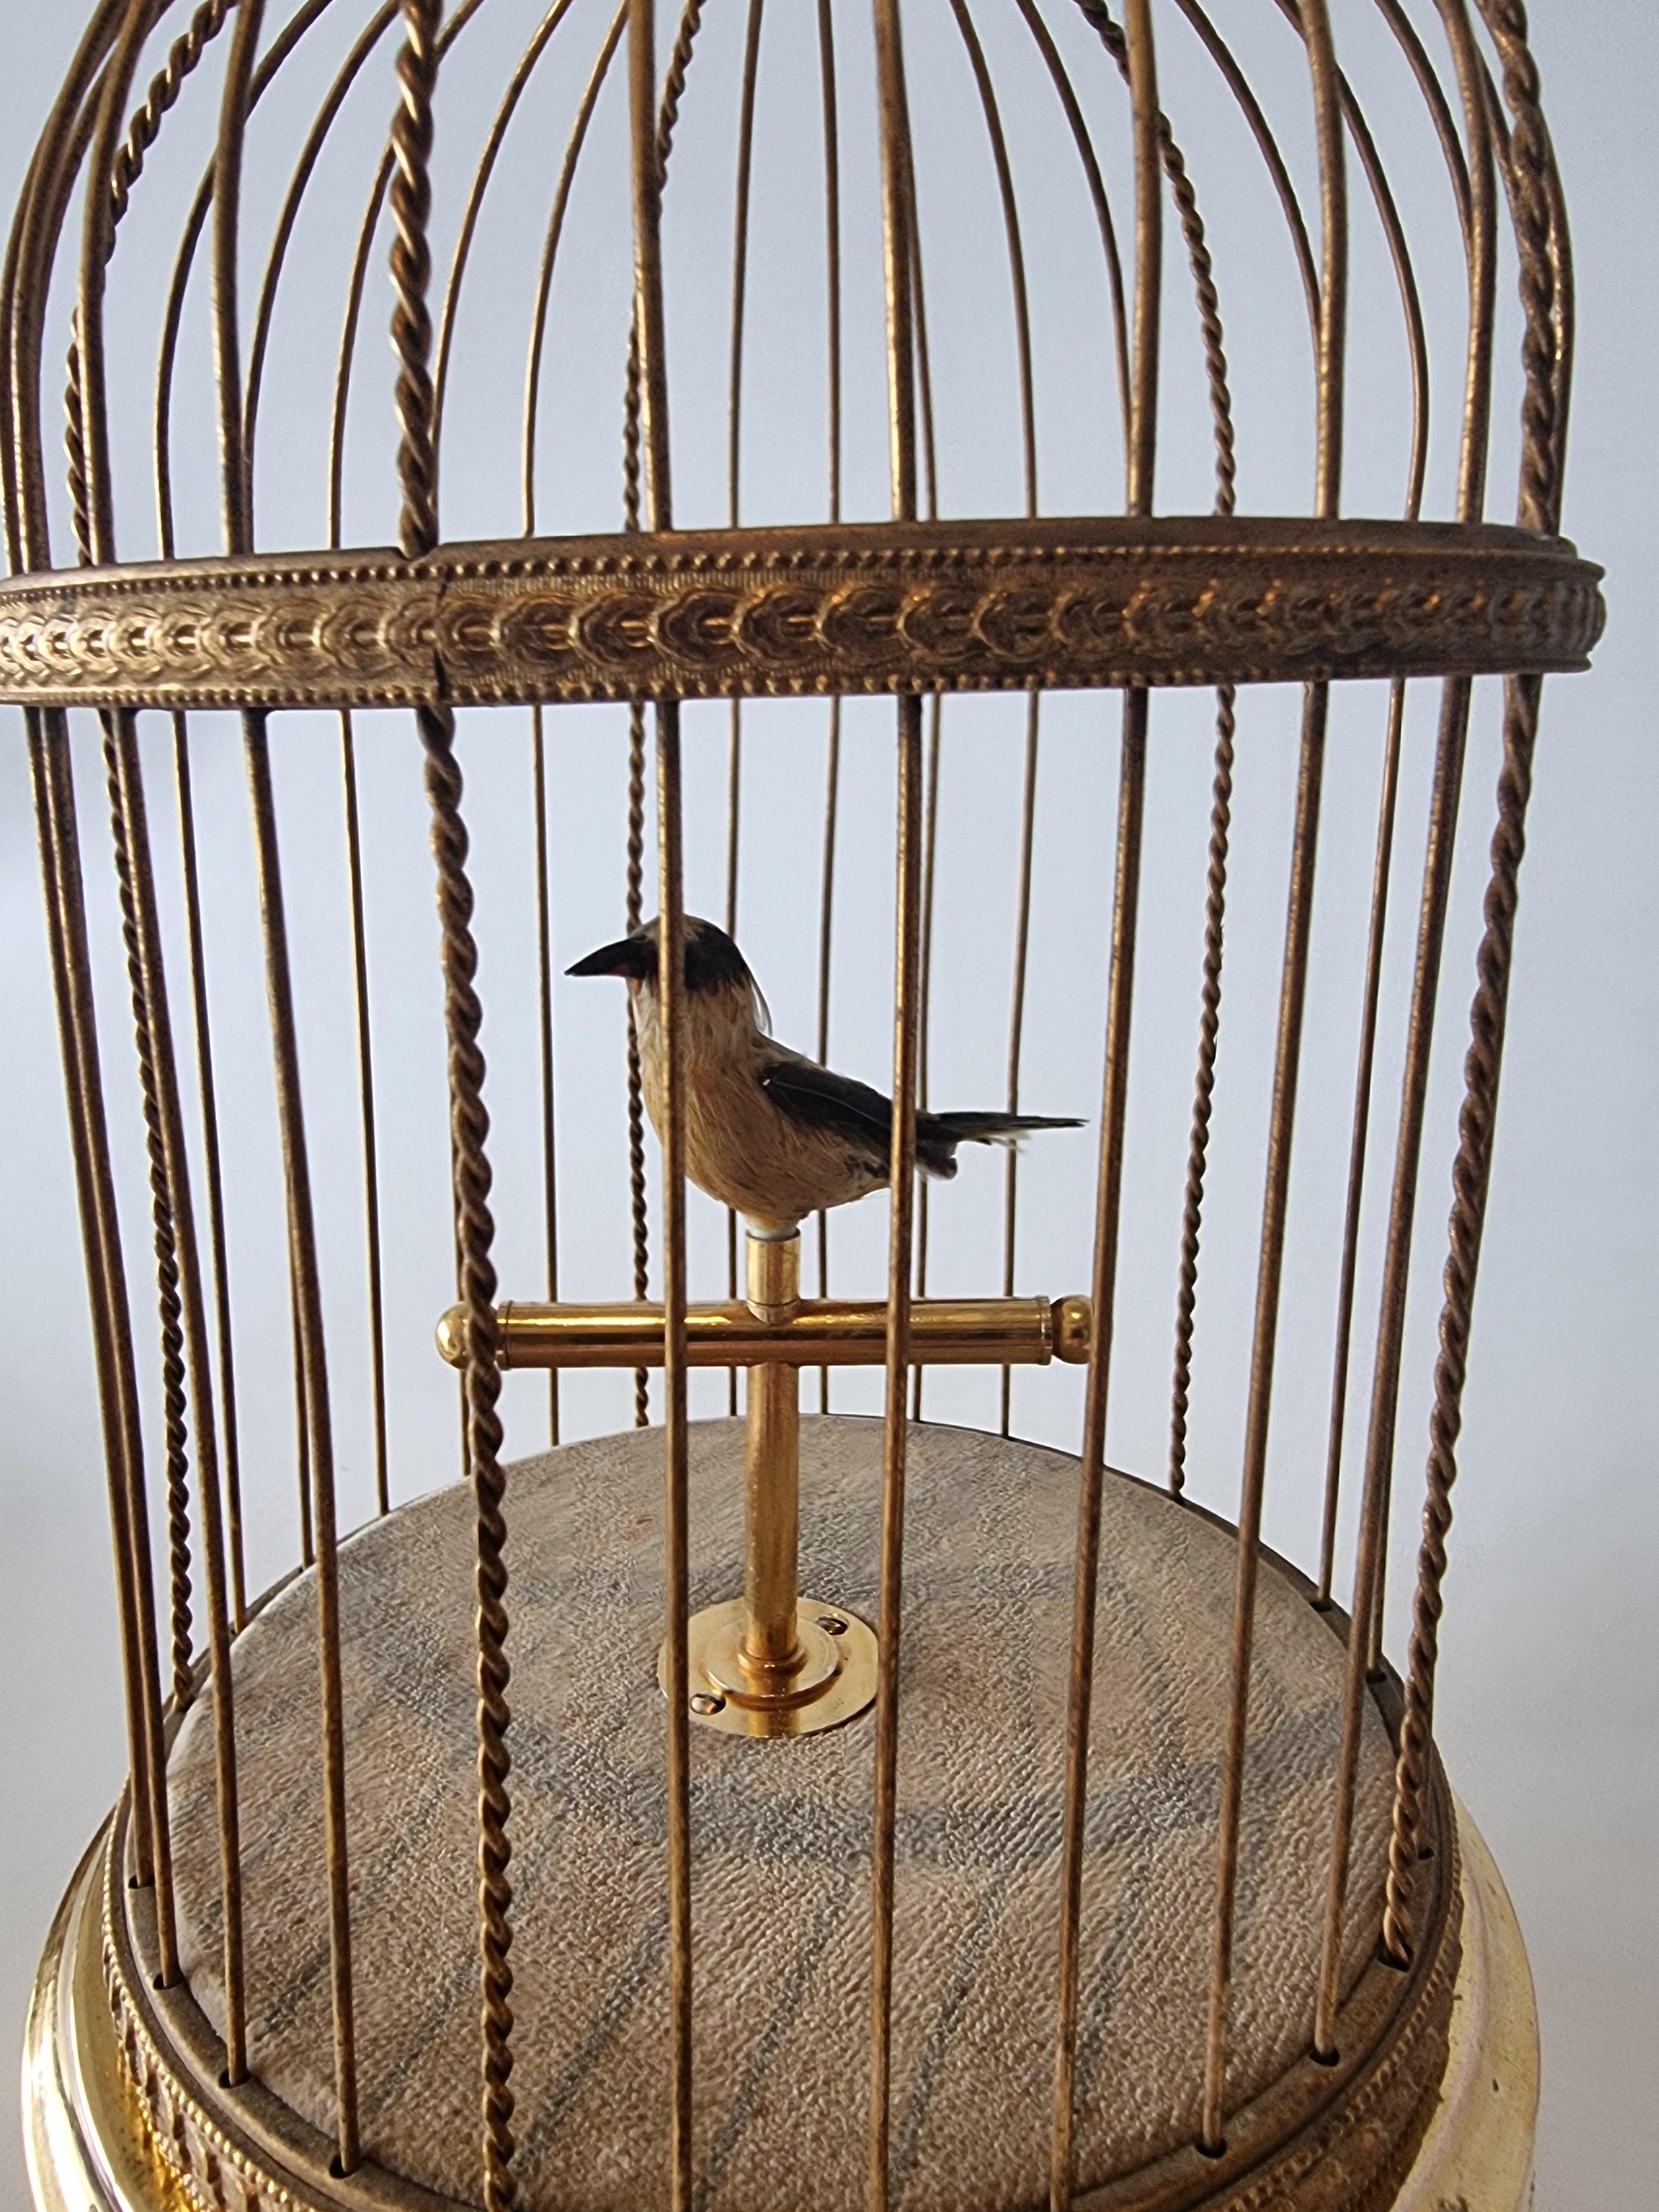 A small size singing bird cage by Reuge of Switzerland, with intermittent and continuous action settings. When wound and the start/stop lever slid to full position, the perched bird sings the jolly and melodic continuous phases, perfectly